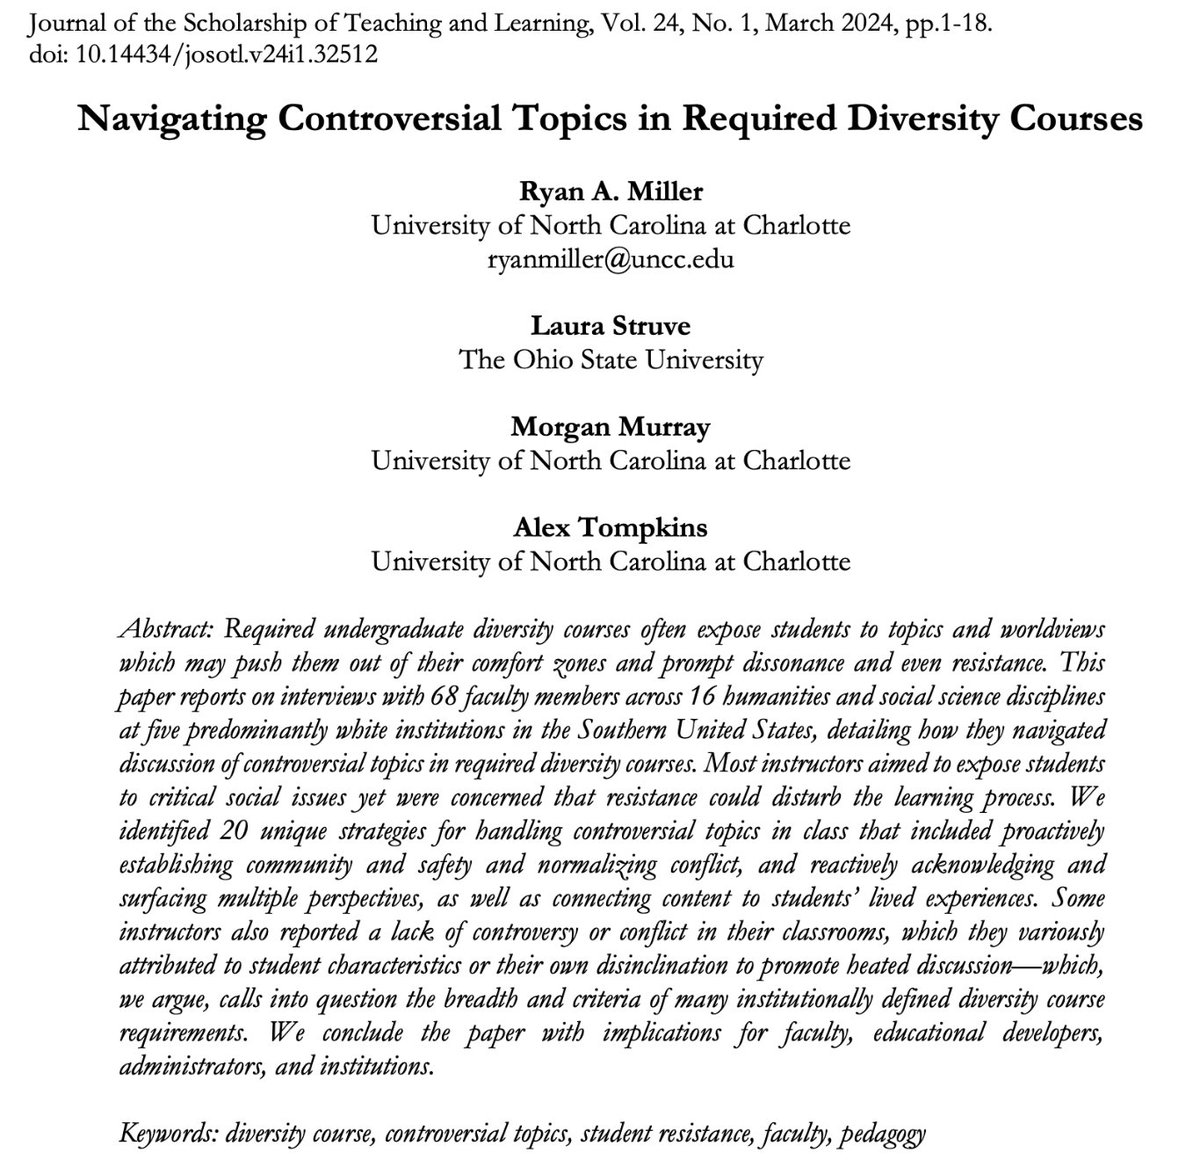 New open access article in the Journal of the Scholarship of Teaching and Learning w/Laura Struve, Morgan Murray, Alex Tompkins - Navigating Controversy and Hot Topics in Required Diversity Courses scholarworks.iu.edu/journals/index… @CLT_COED